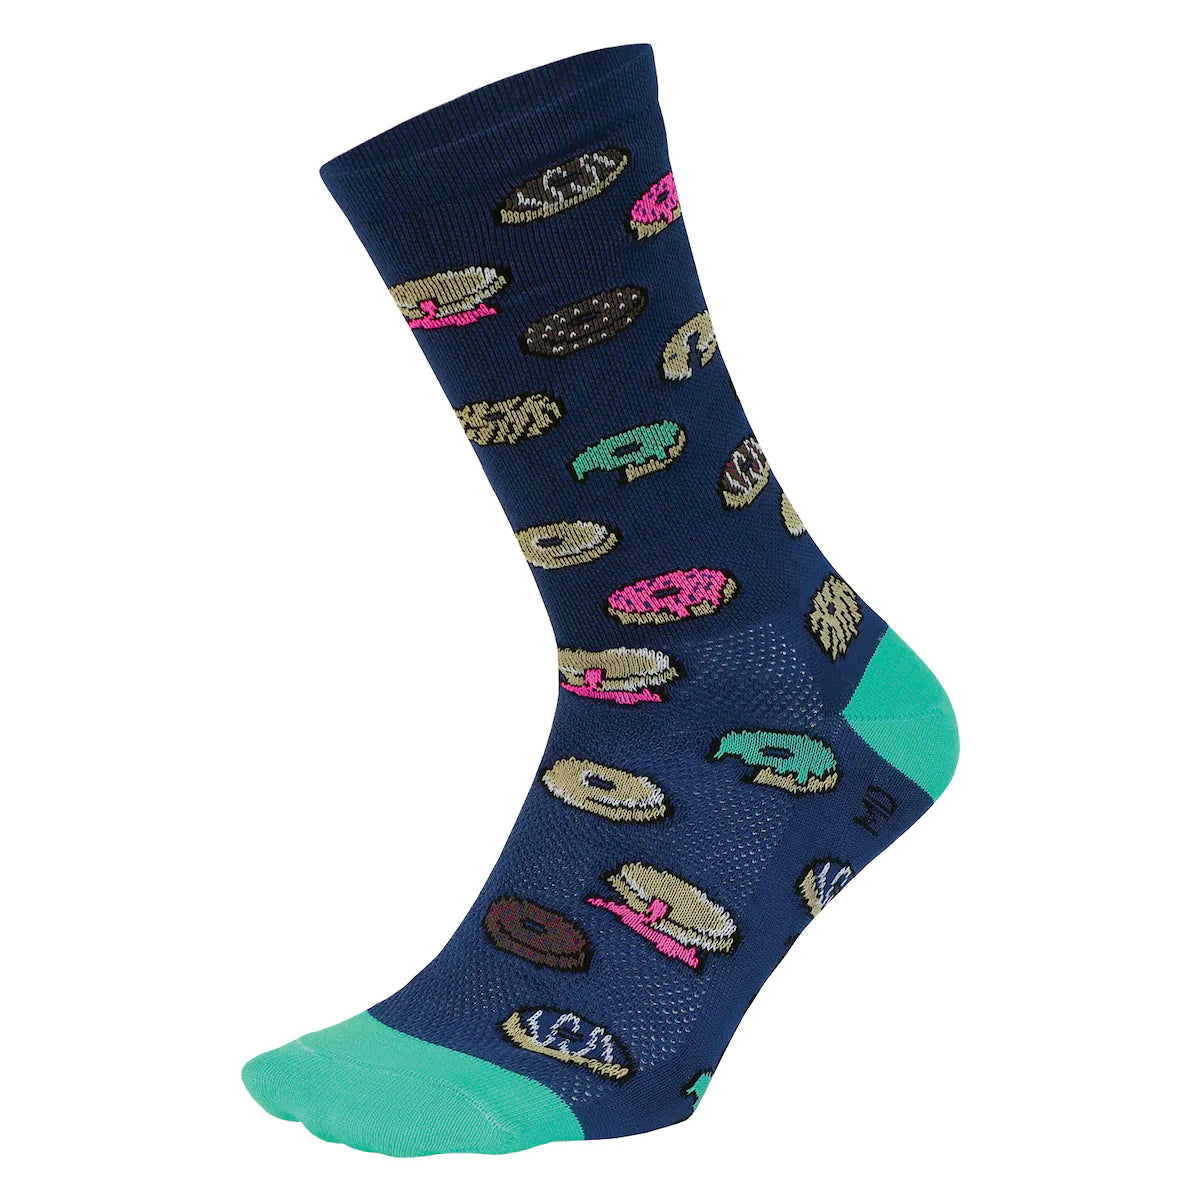 DeFeet Aireator 6” Doughnut cycling sock in light navy with doughnuts on cuff and celeste green heel and toe.